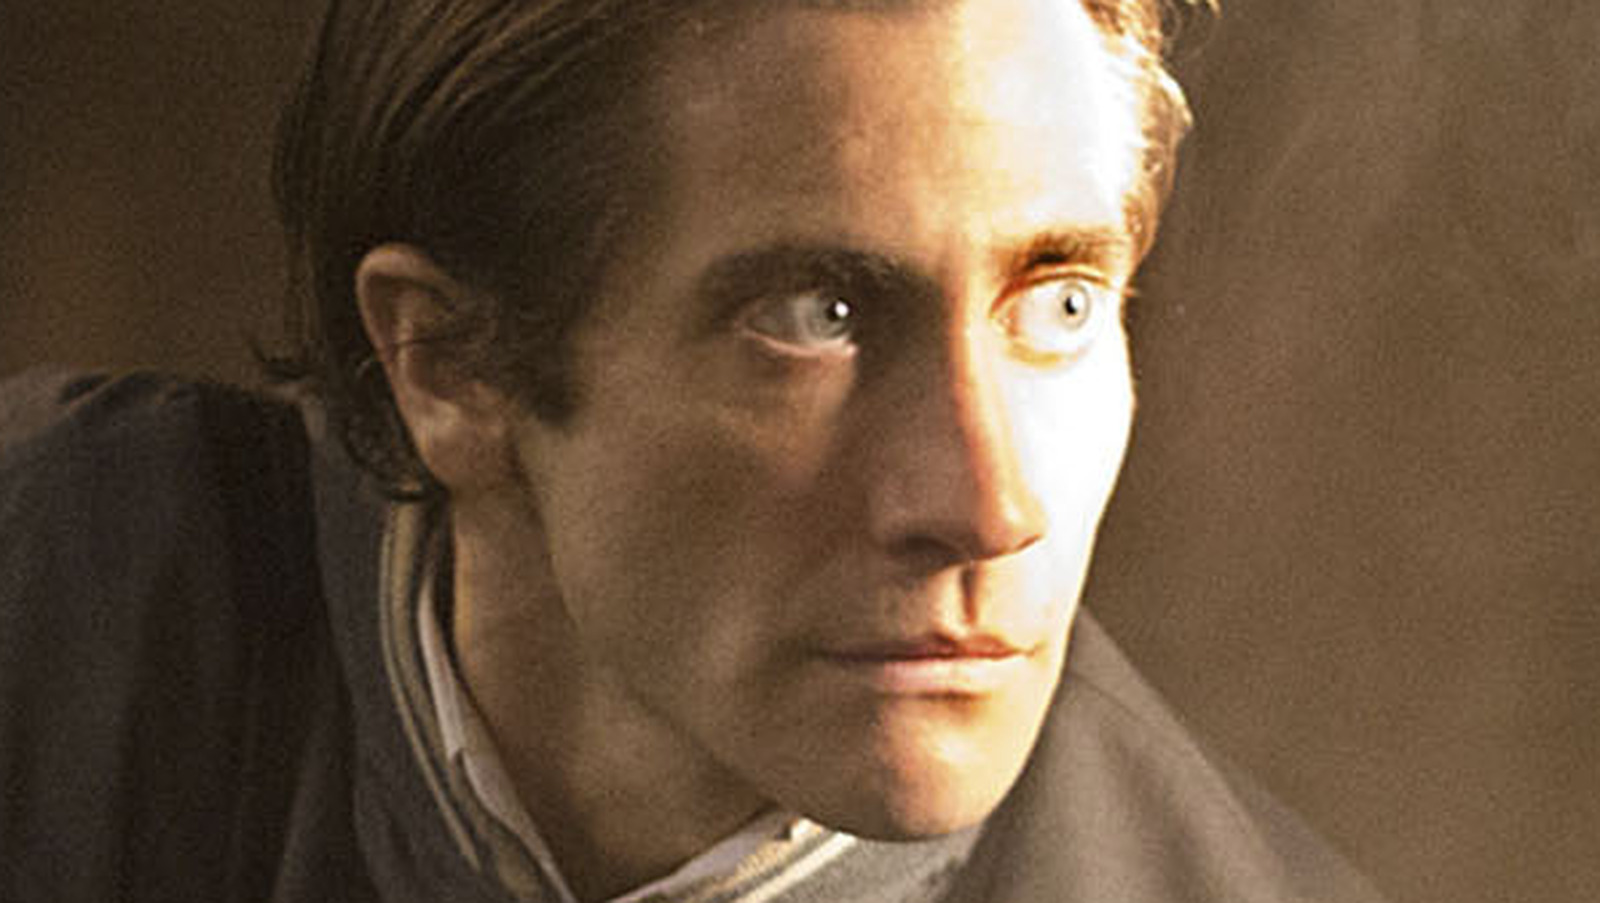 Nightcrawler (Film, Thriller): Reviews, Ratings, Cast and Crew